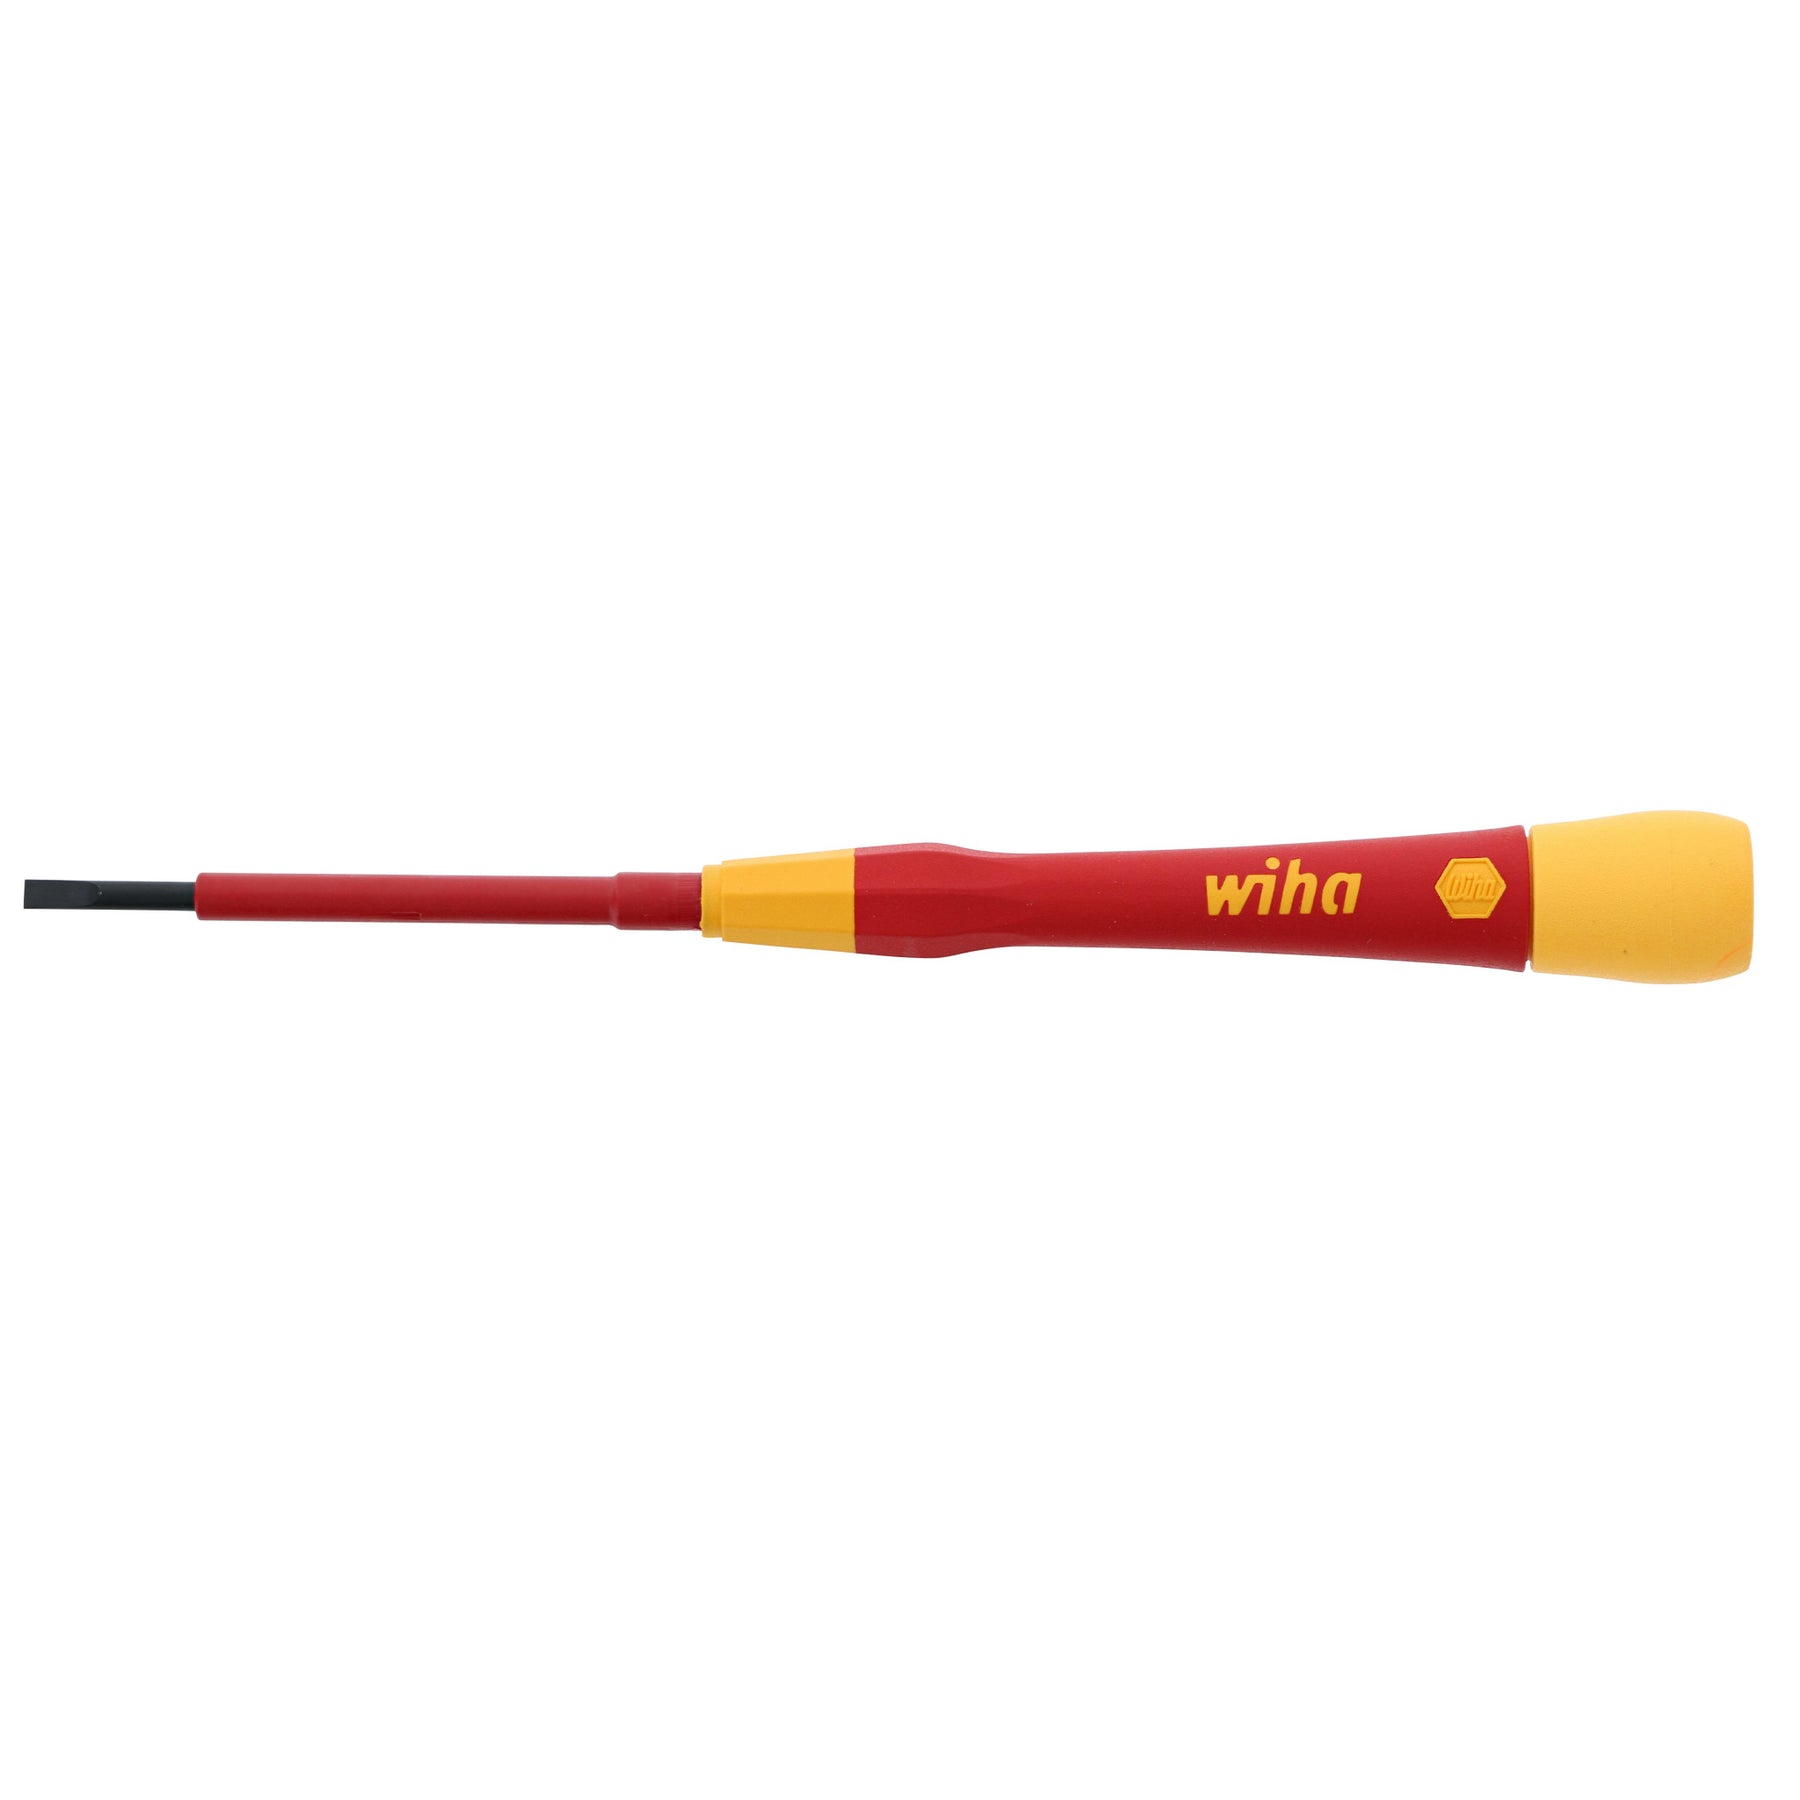 Insulated PicoFinish Precision Slotted Screwdriver 3.0mm x 60mm